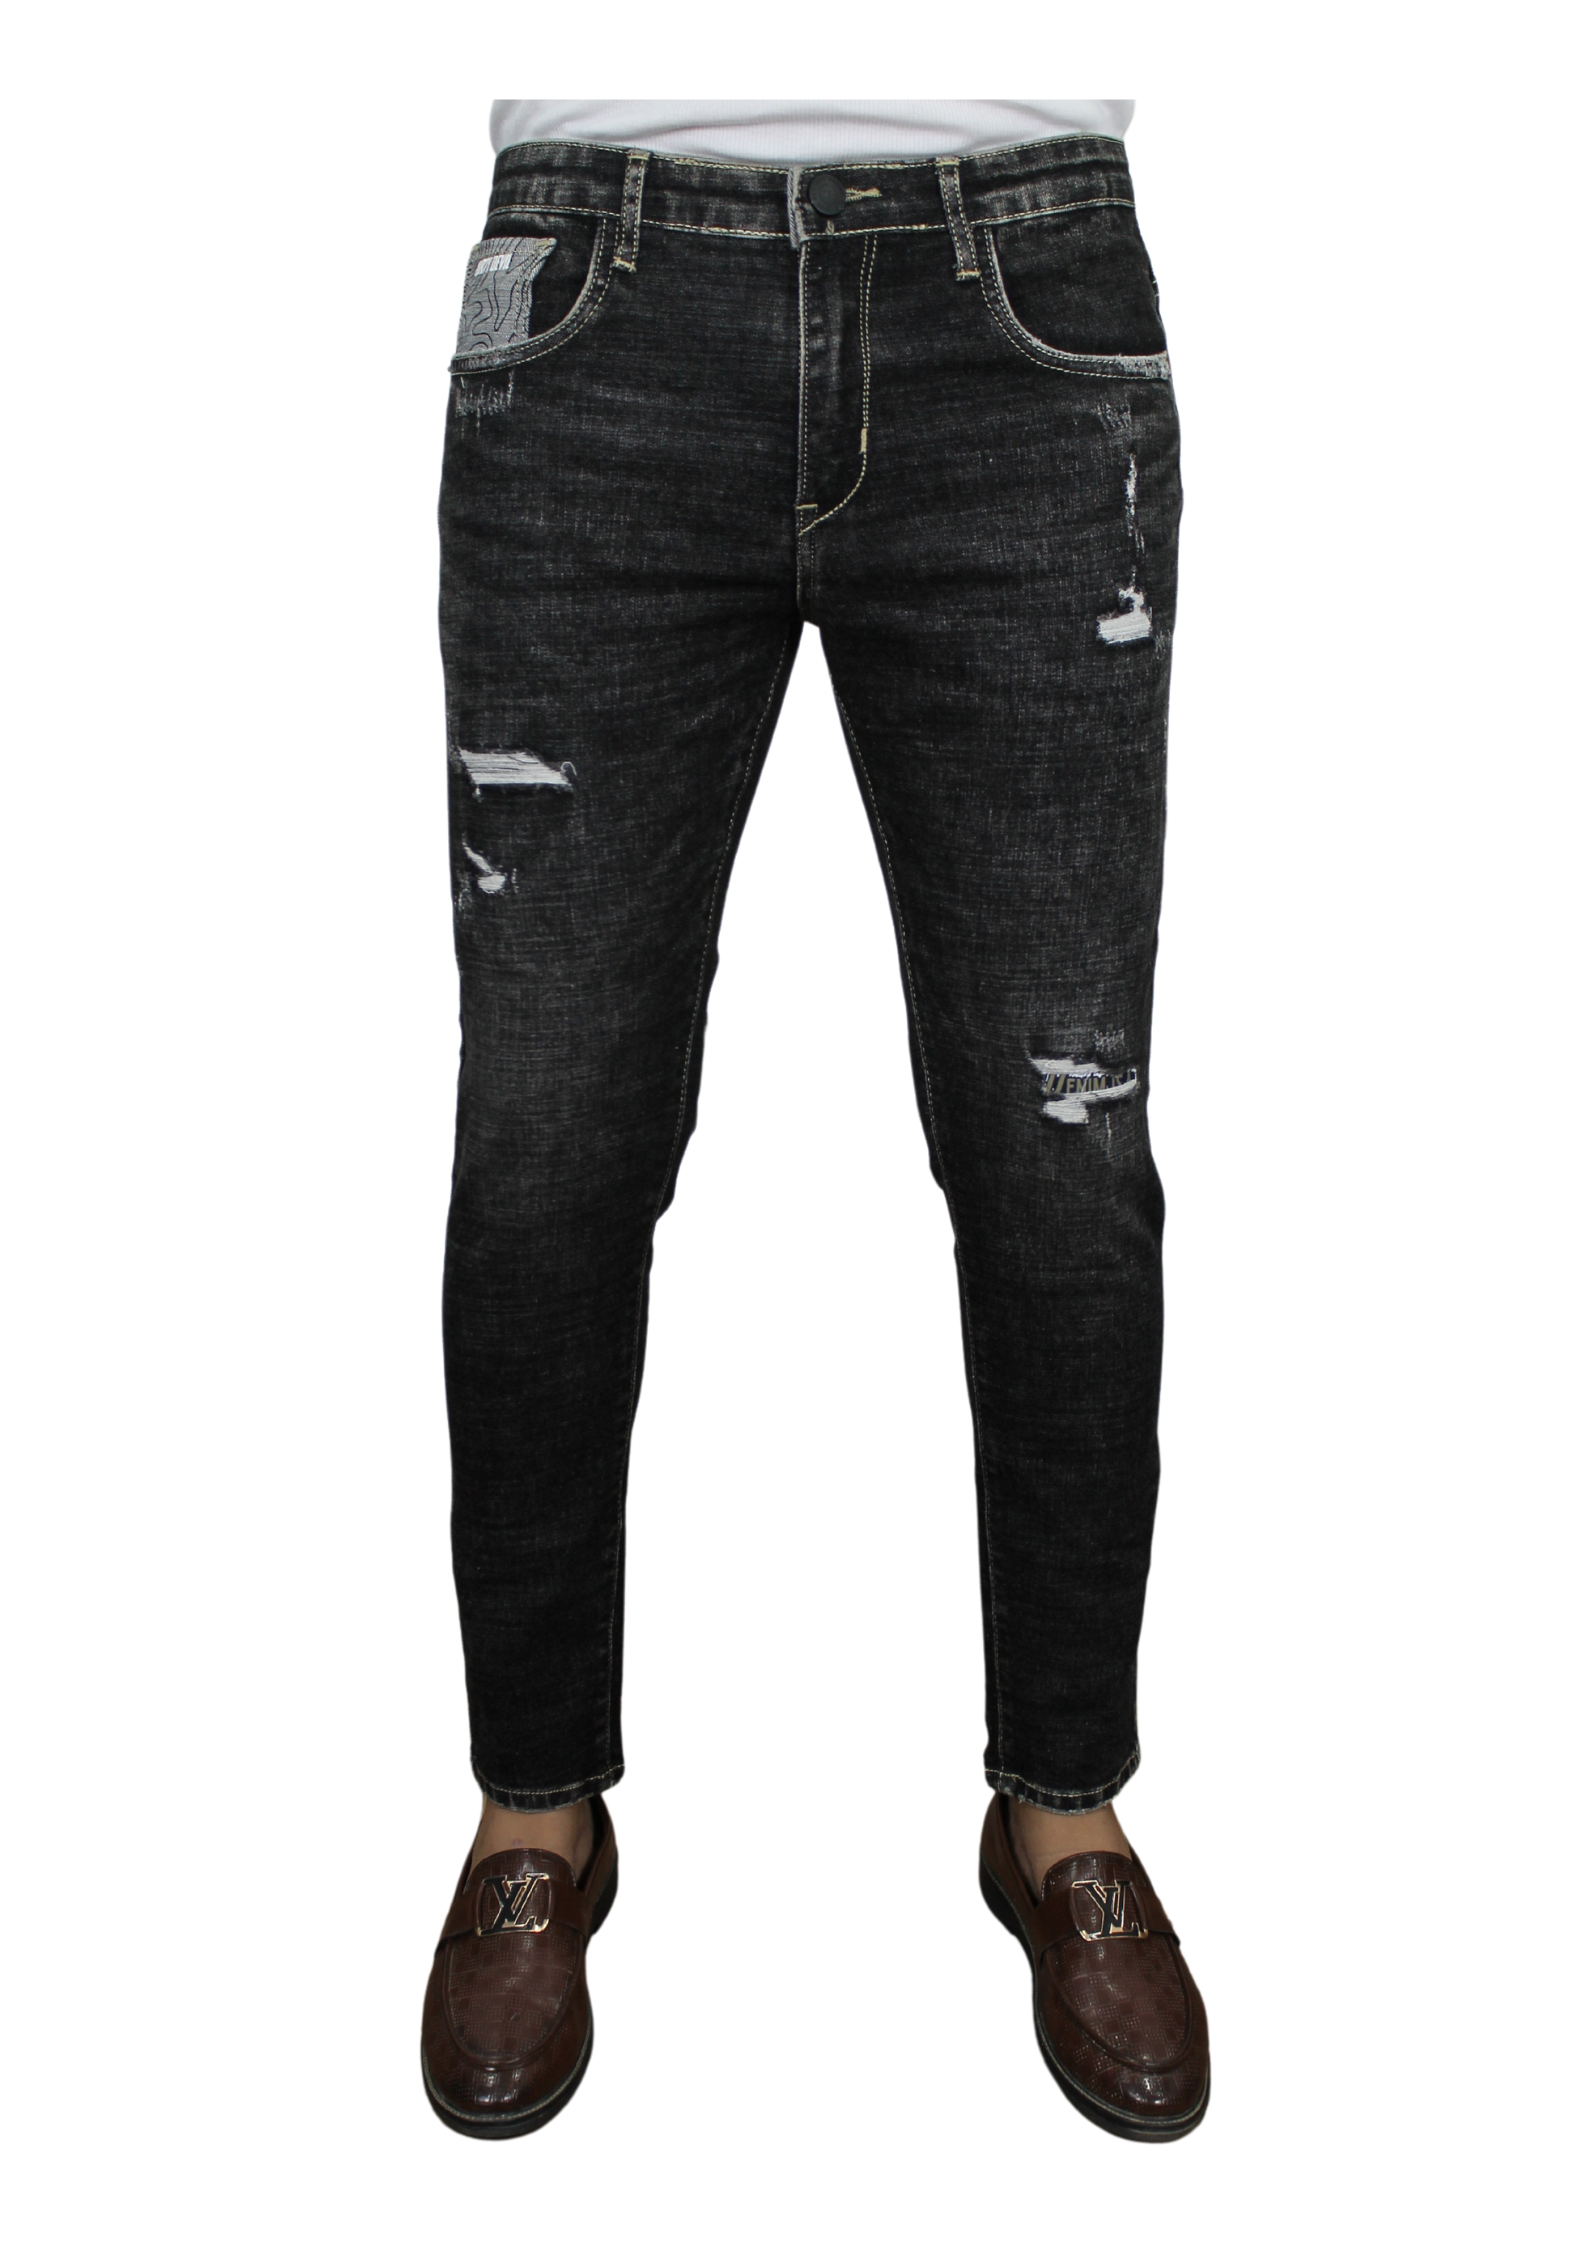 Smooth Charcoel Gray Dark Ankle Fit Funky Denim Jeans